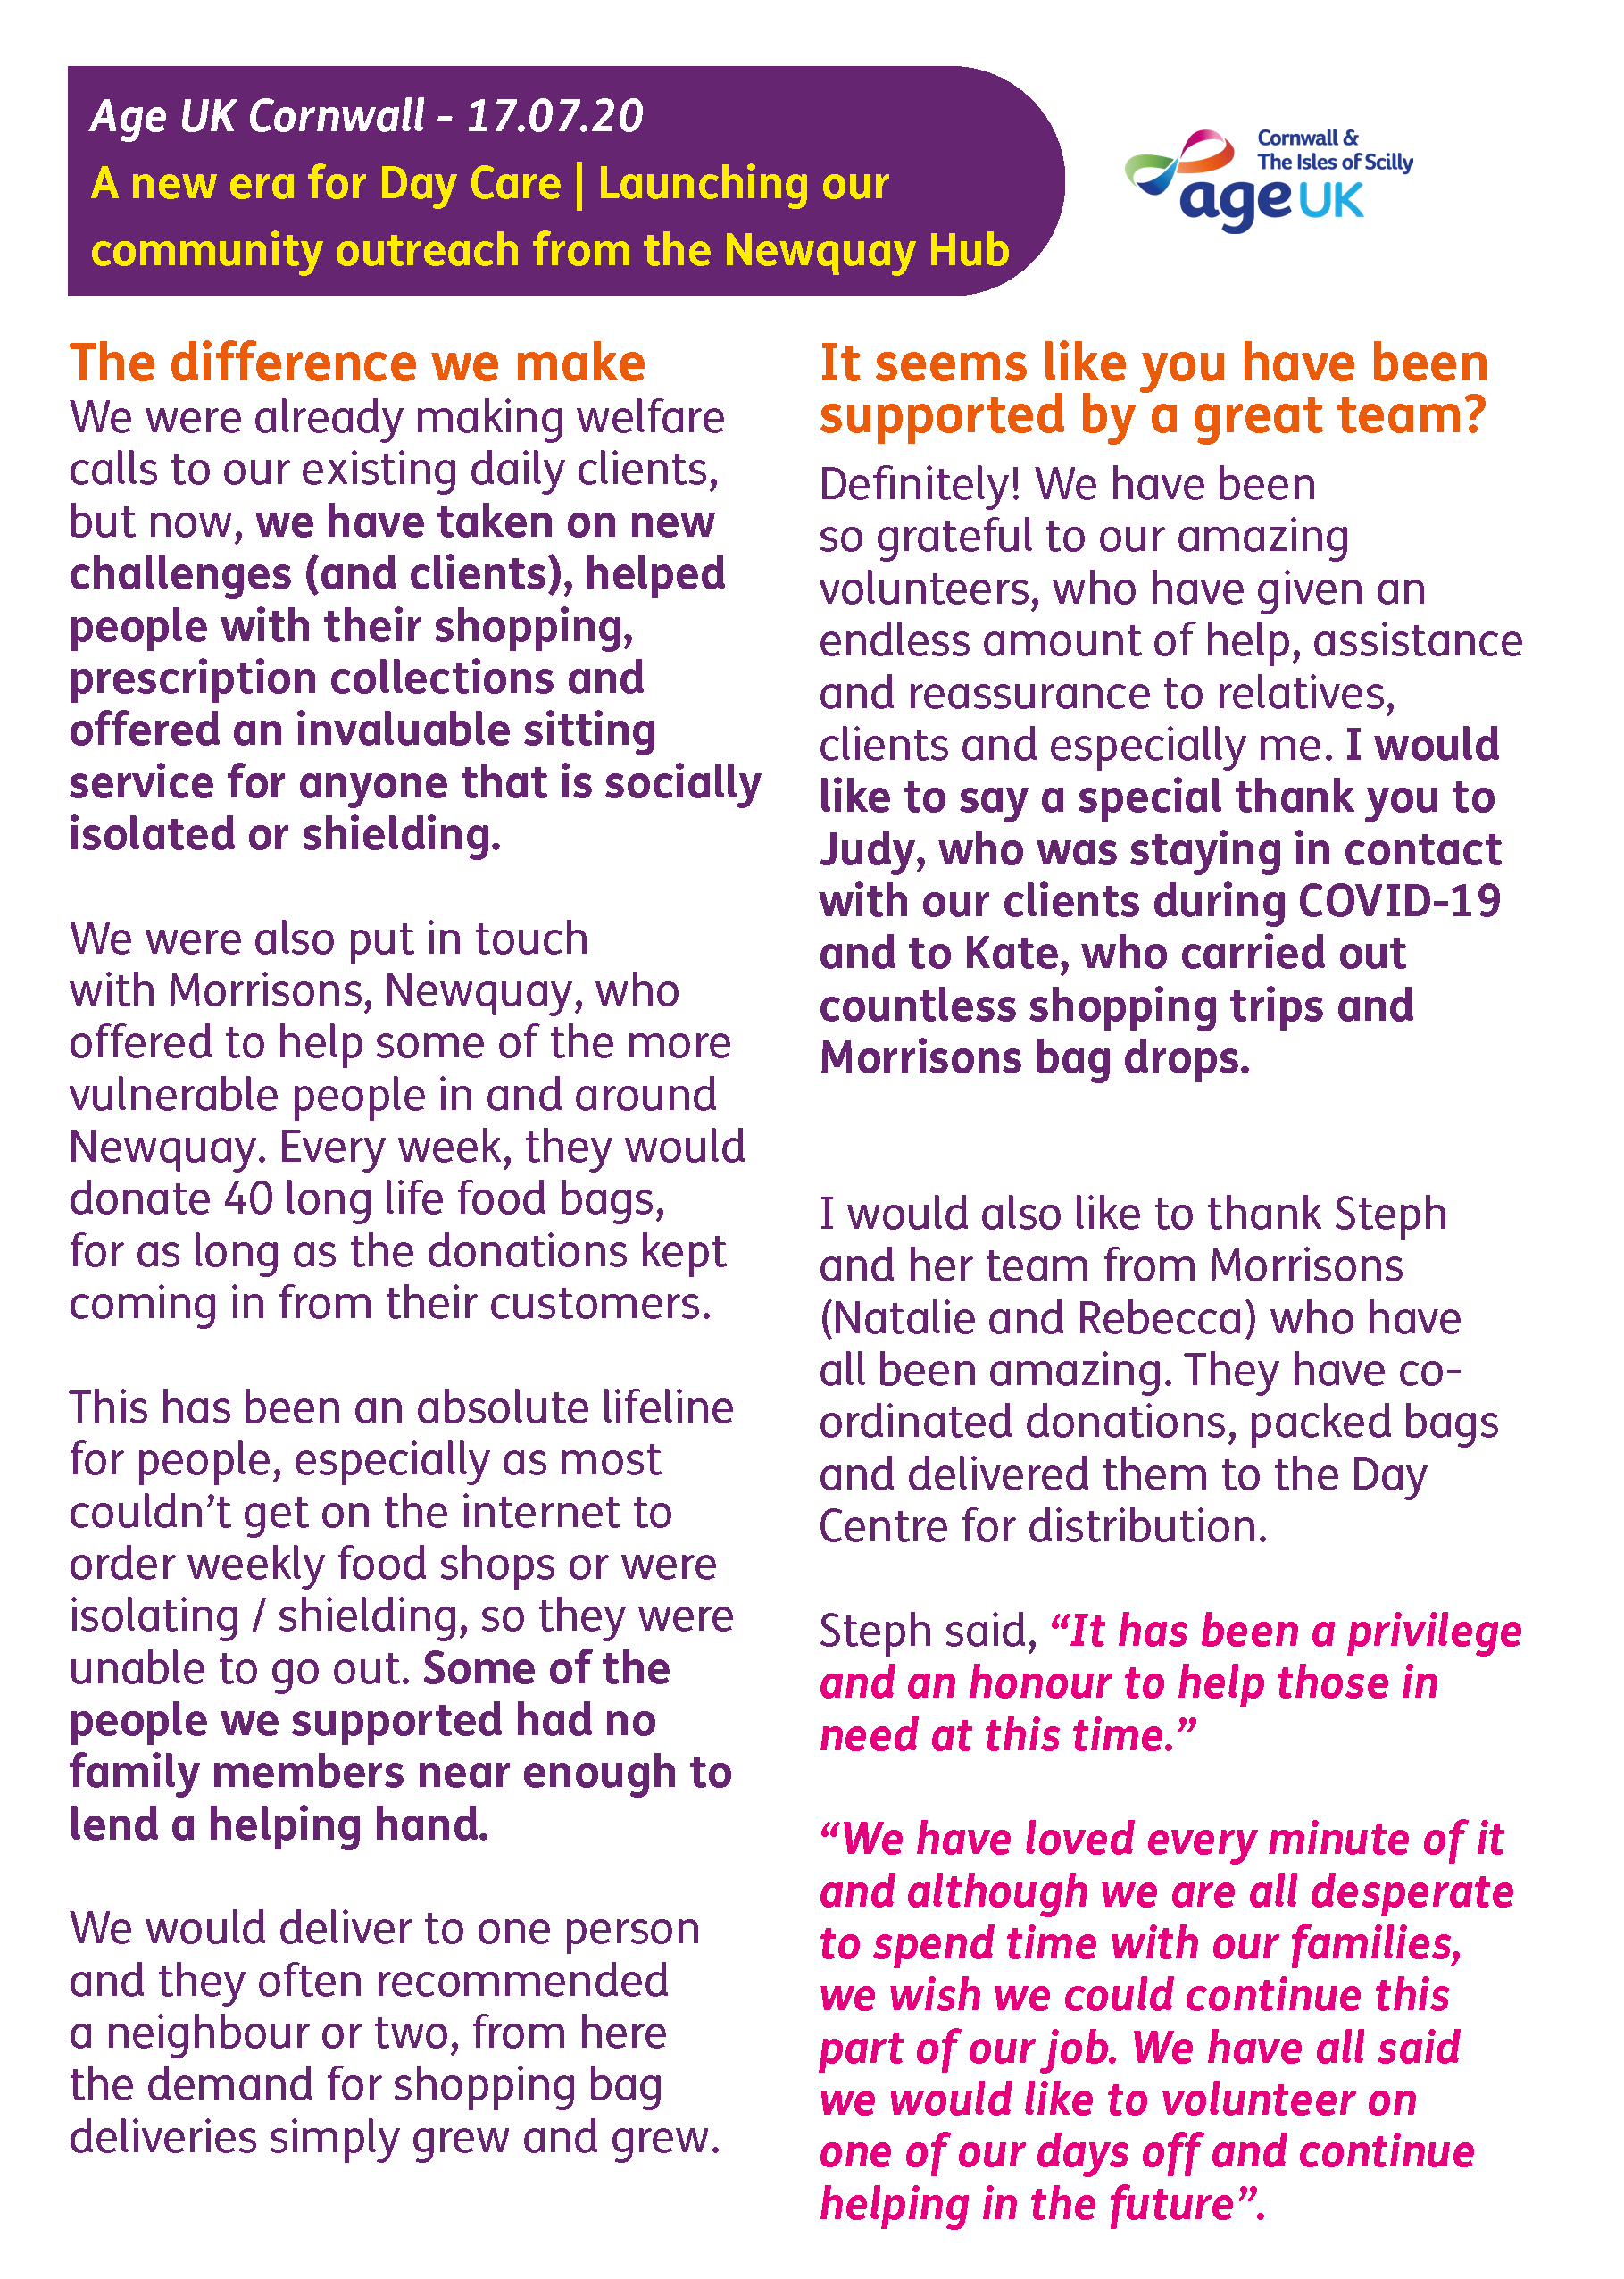 170720 - A new era for Day Care - Community outreach and support (Newquay Community Hub - A new era)_Page_2.png